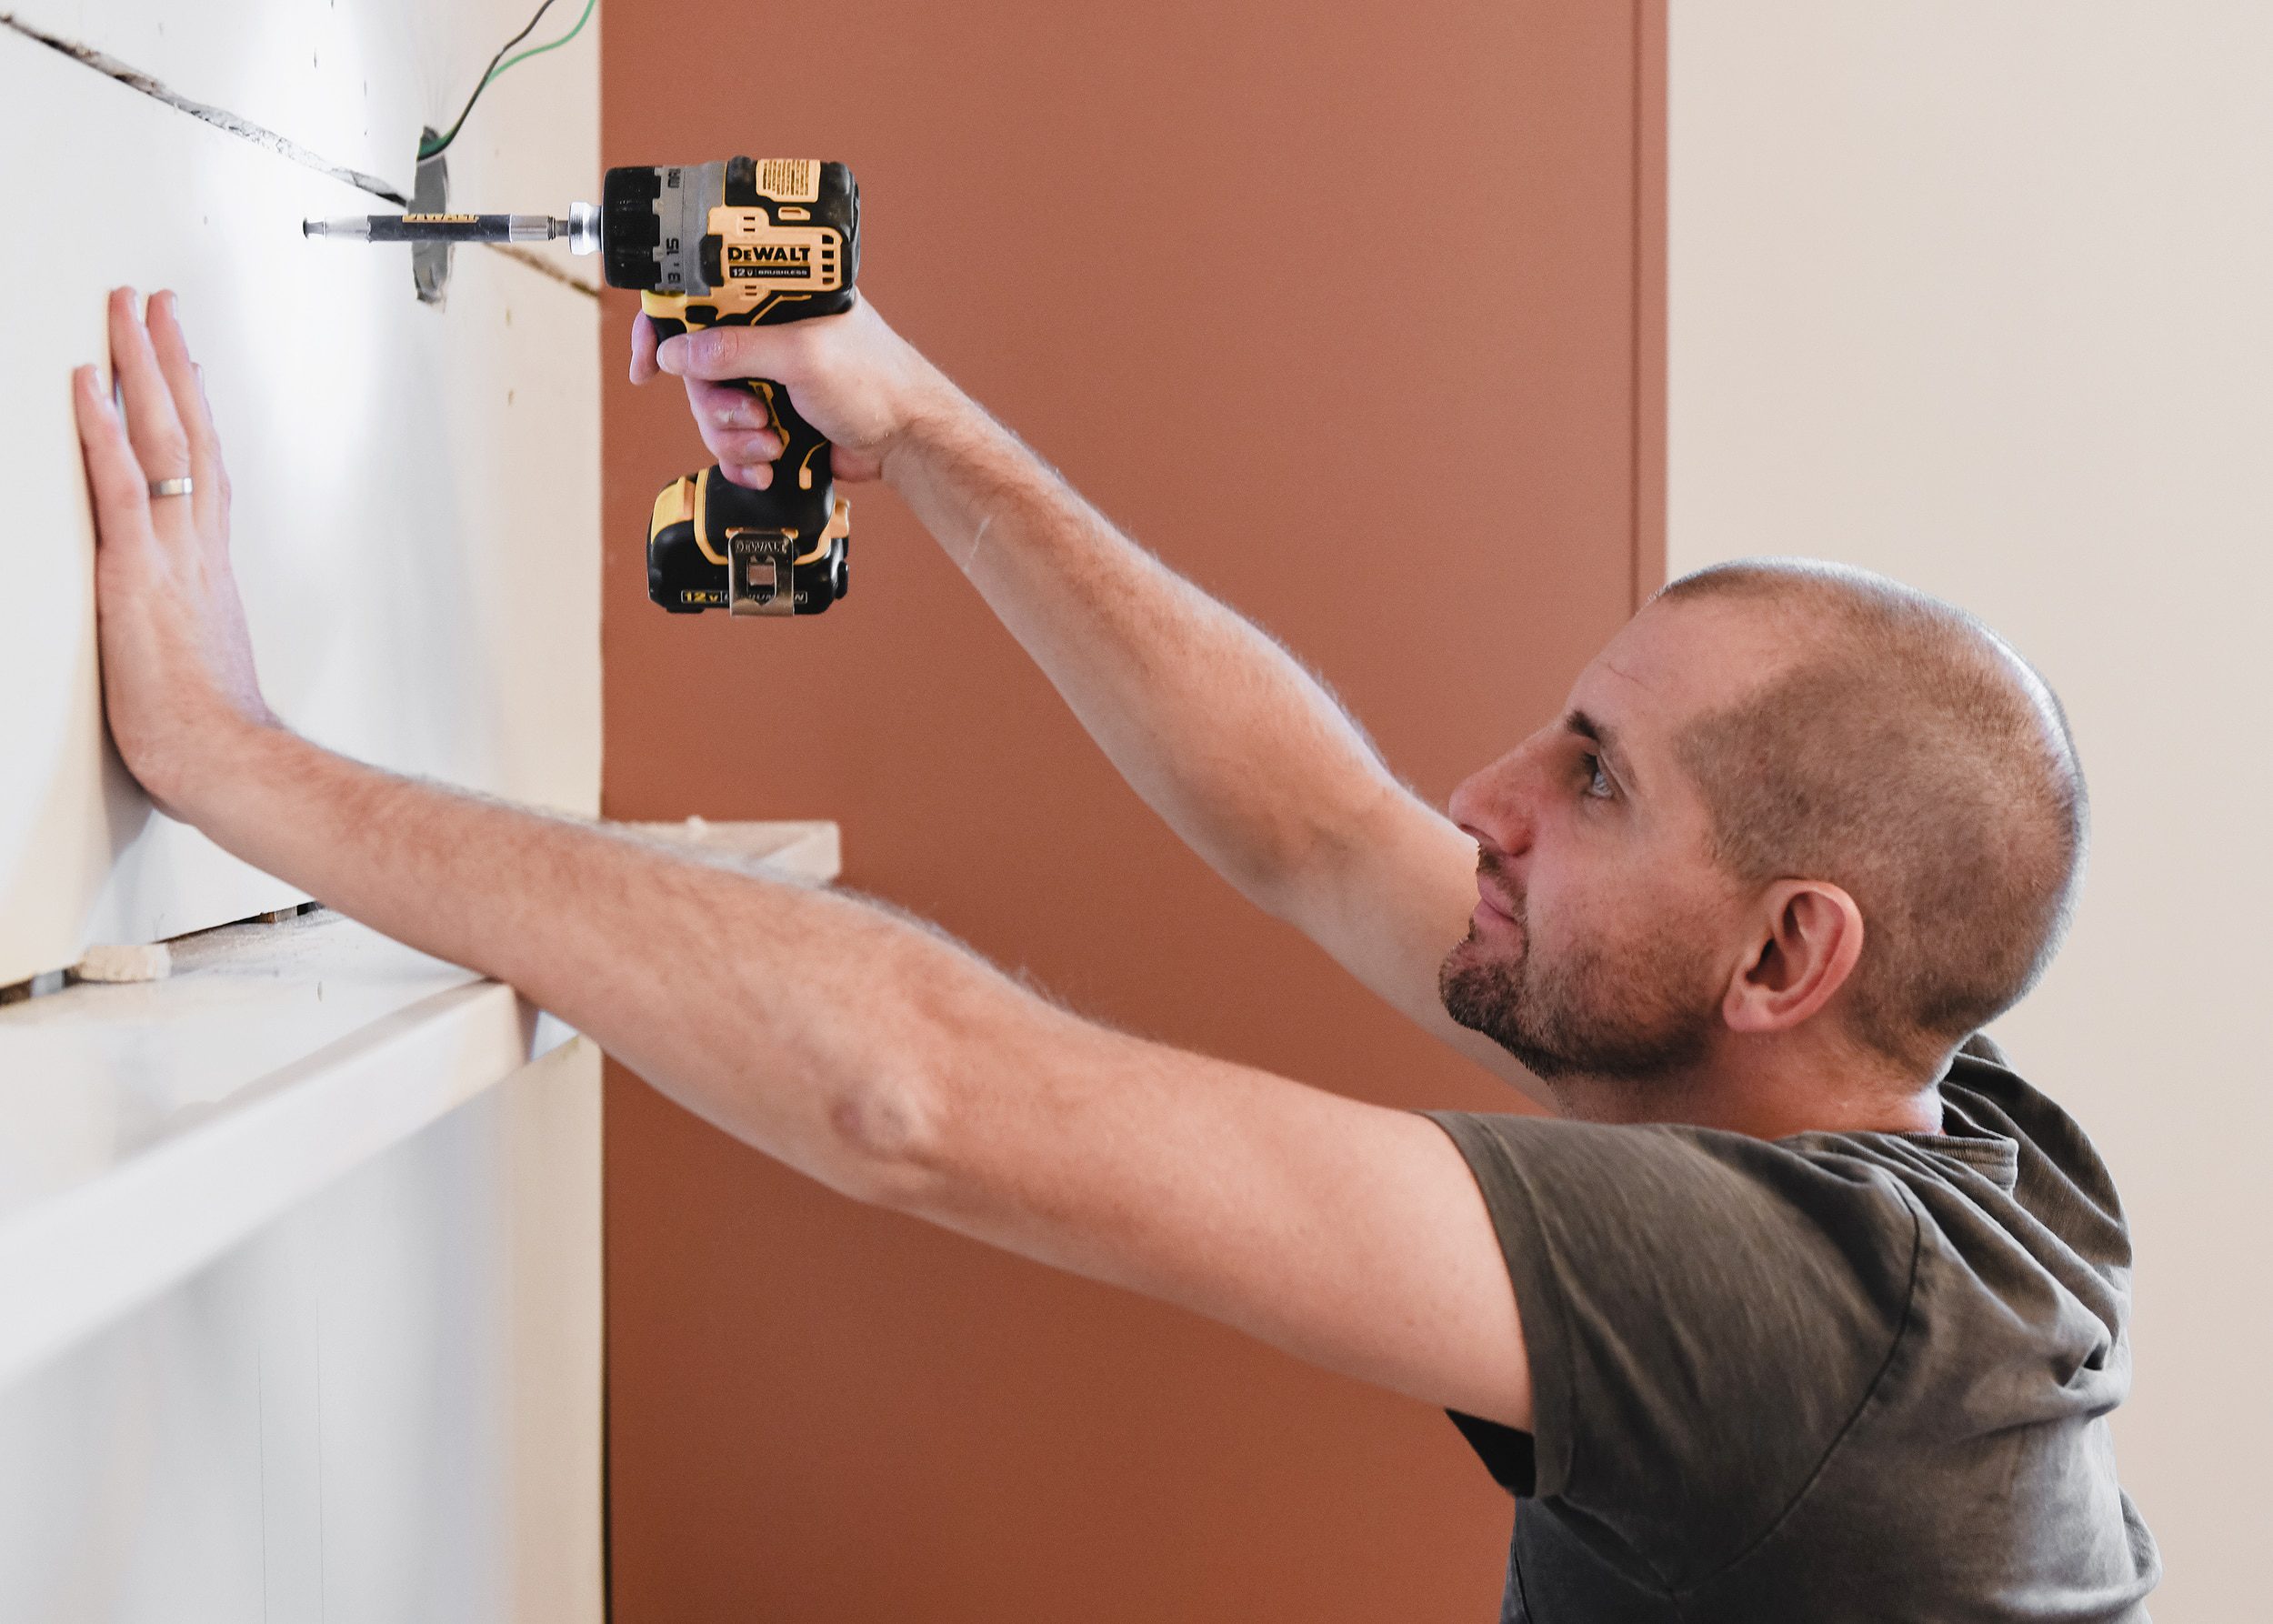 Scott re-installs the newly trimmed drywall patch // via Yellow Brick Home